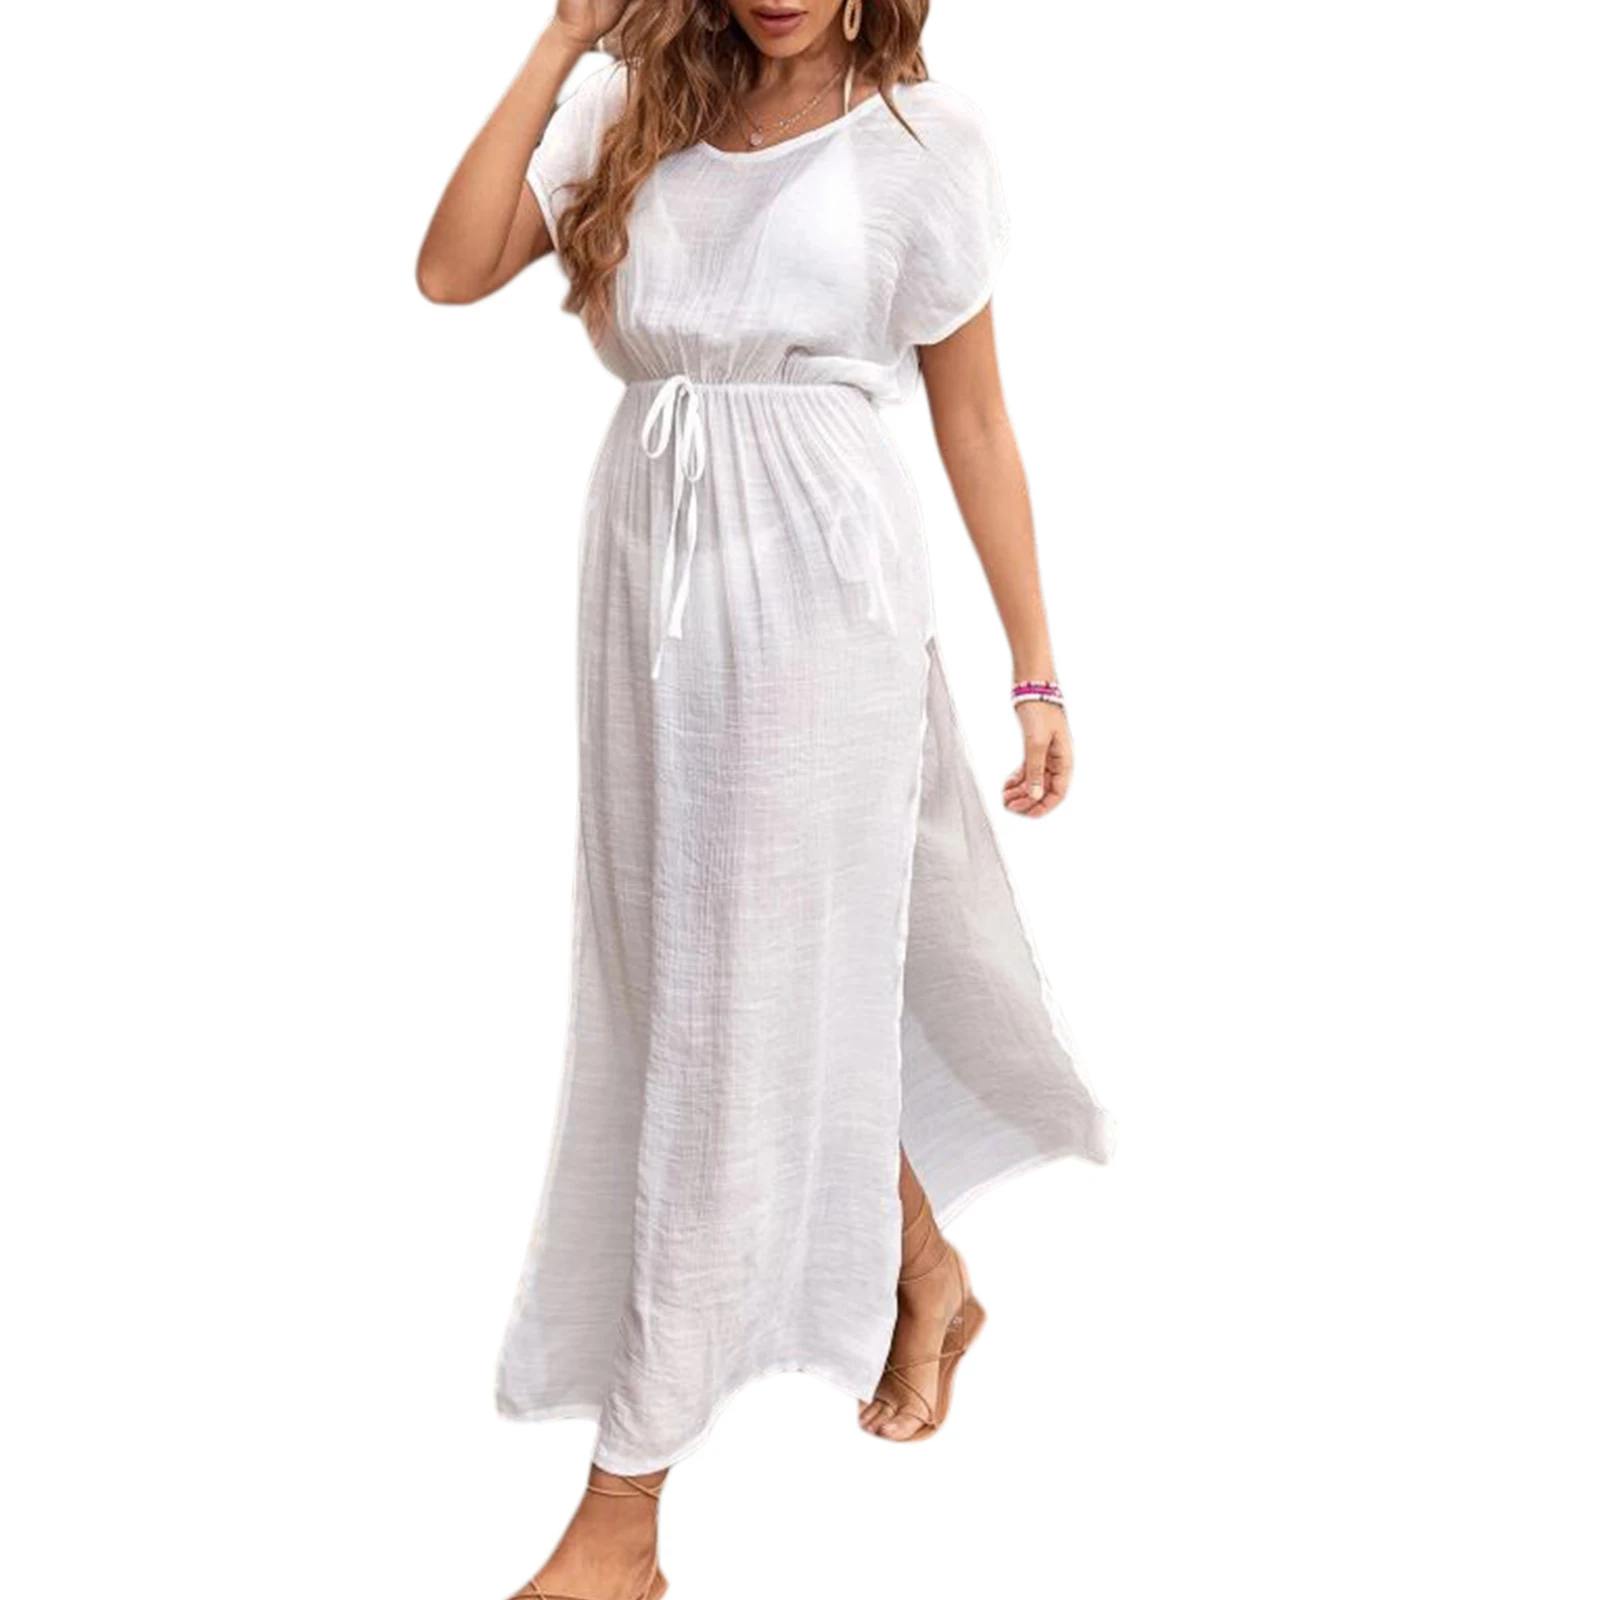 bathing suit skirt cover up Women Clothing Cover Up Dress Solid Color Short Sleeve Round Neck Slit Drawstring Waist Sheer Dress Beach Bikini Smock shein bathing suit cover ups